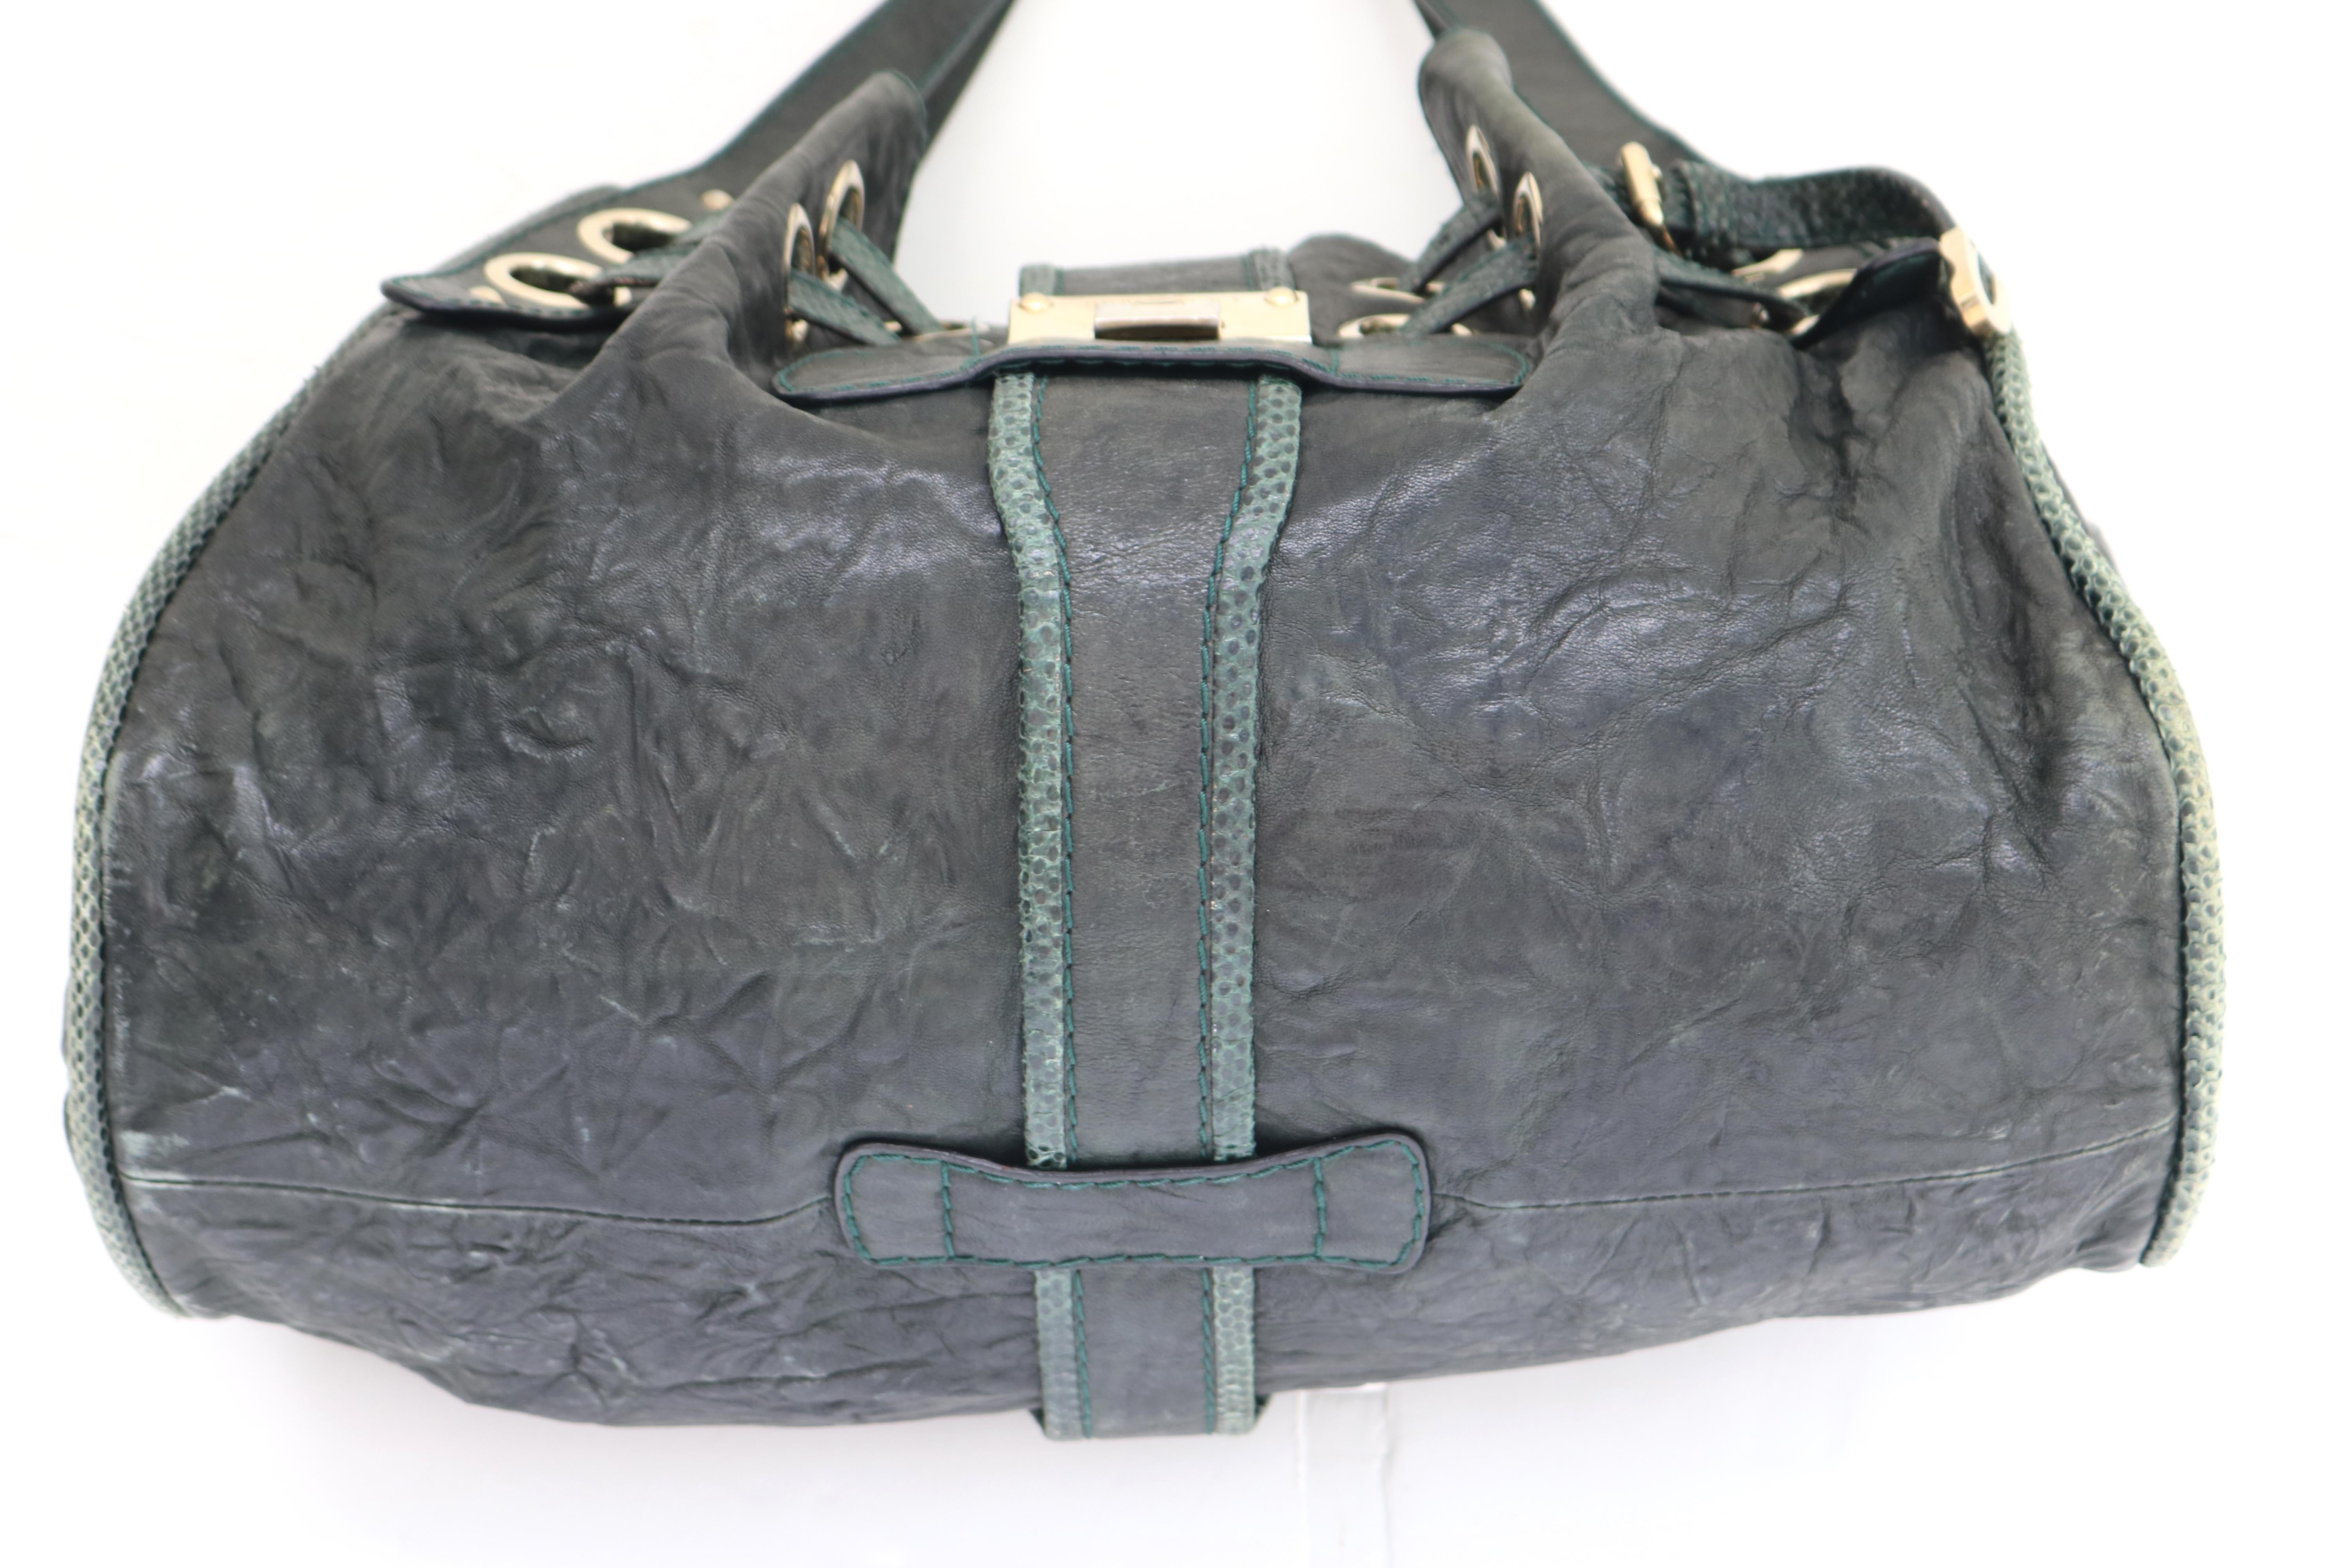 Jimmy Choo Dark Green Leather Snakeskin Trim Riki Tote In Good Condition For Sale In West Palm Beach, FL